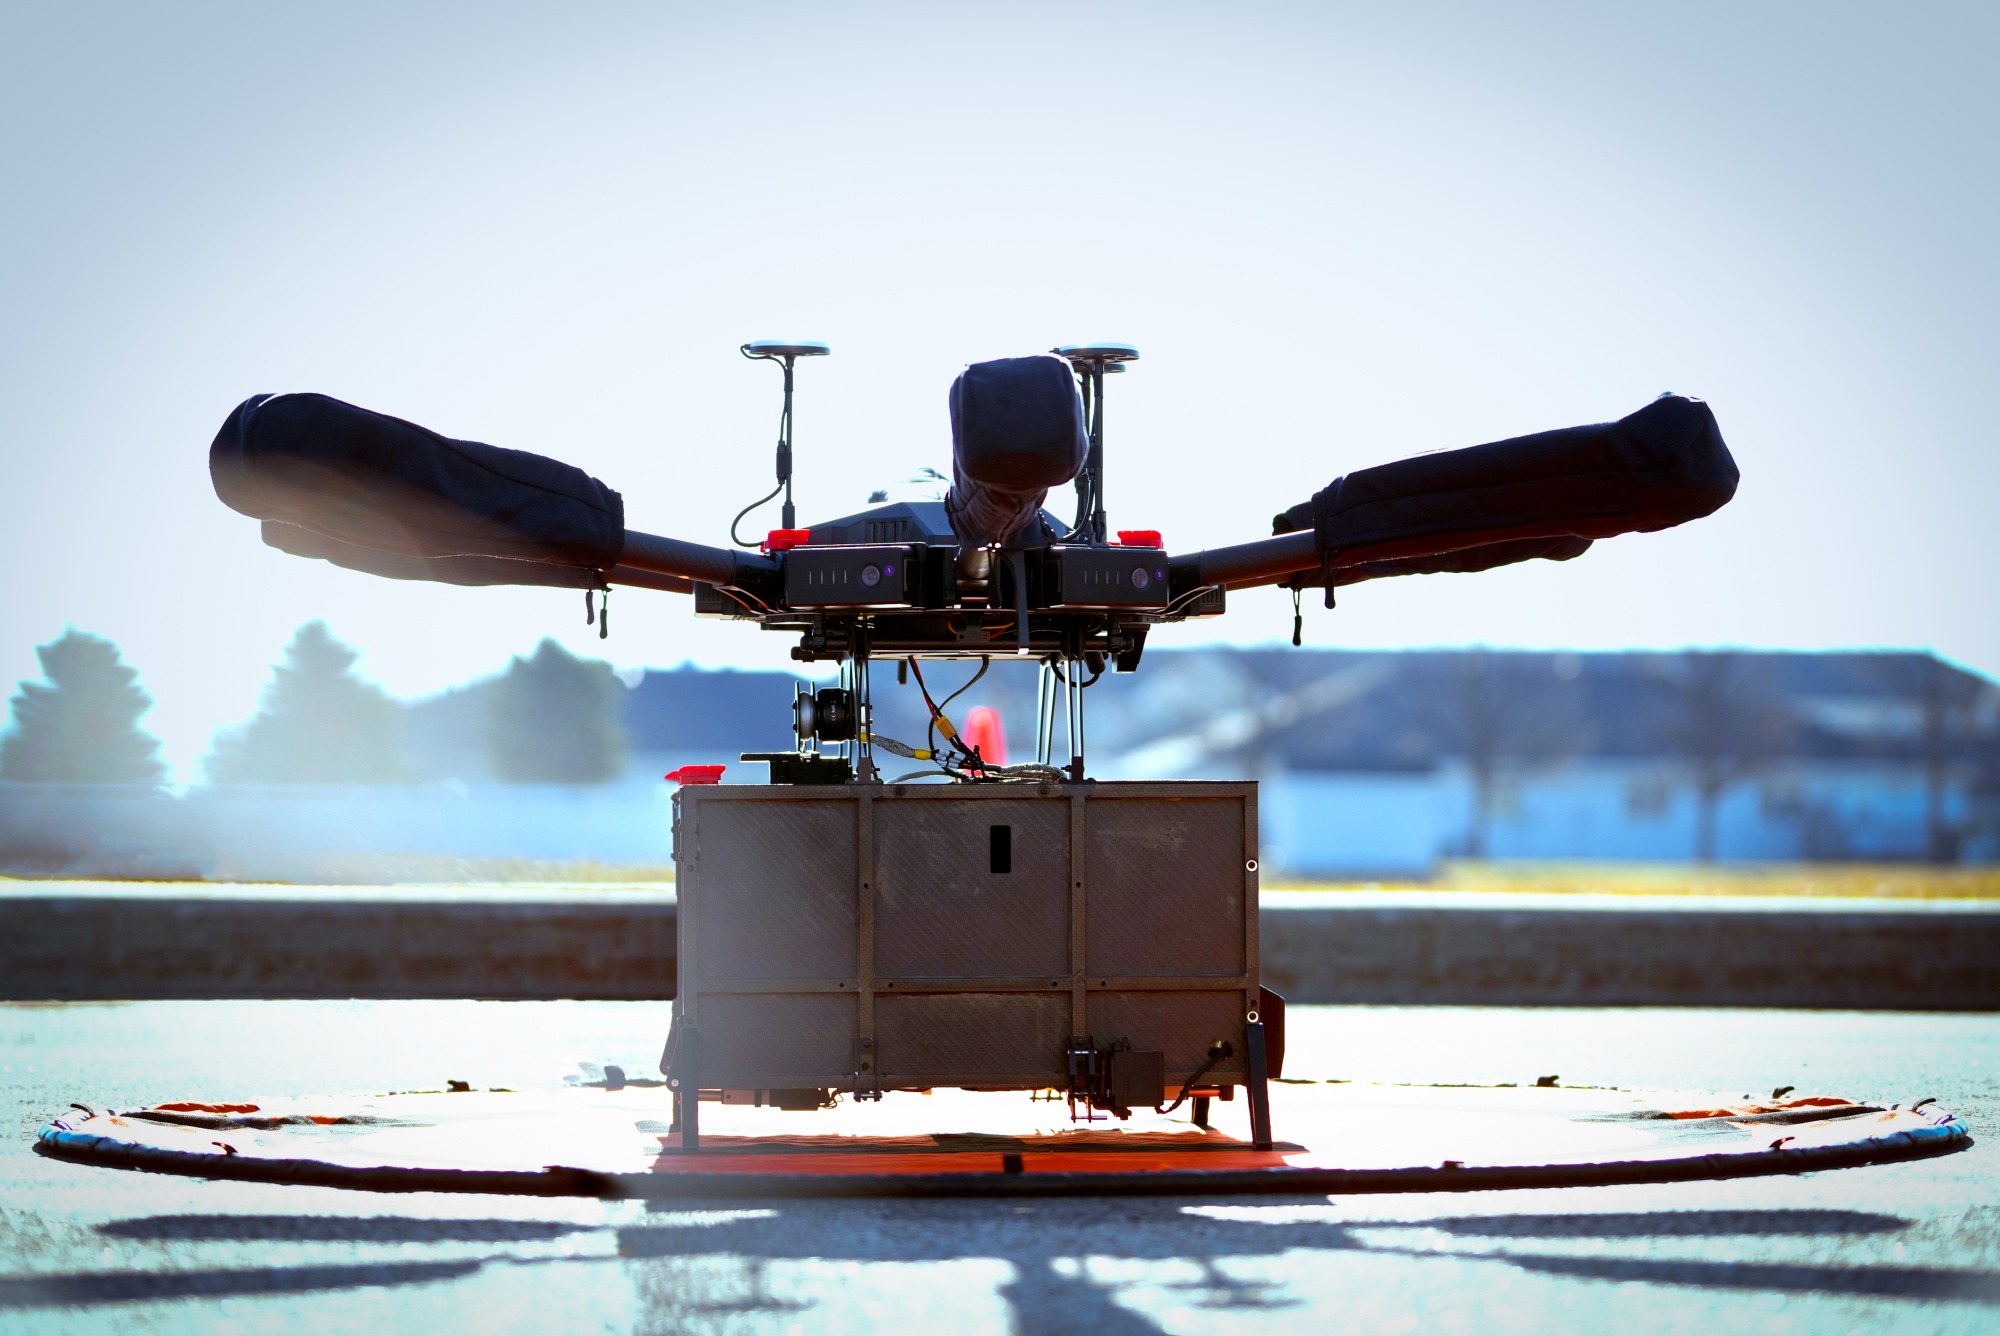 drone delivery startup poised to expand u.s. operations with new funding - bloomberg